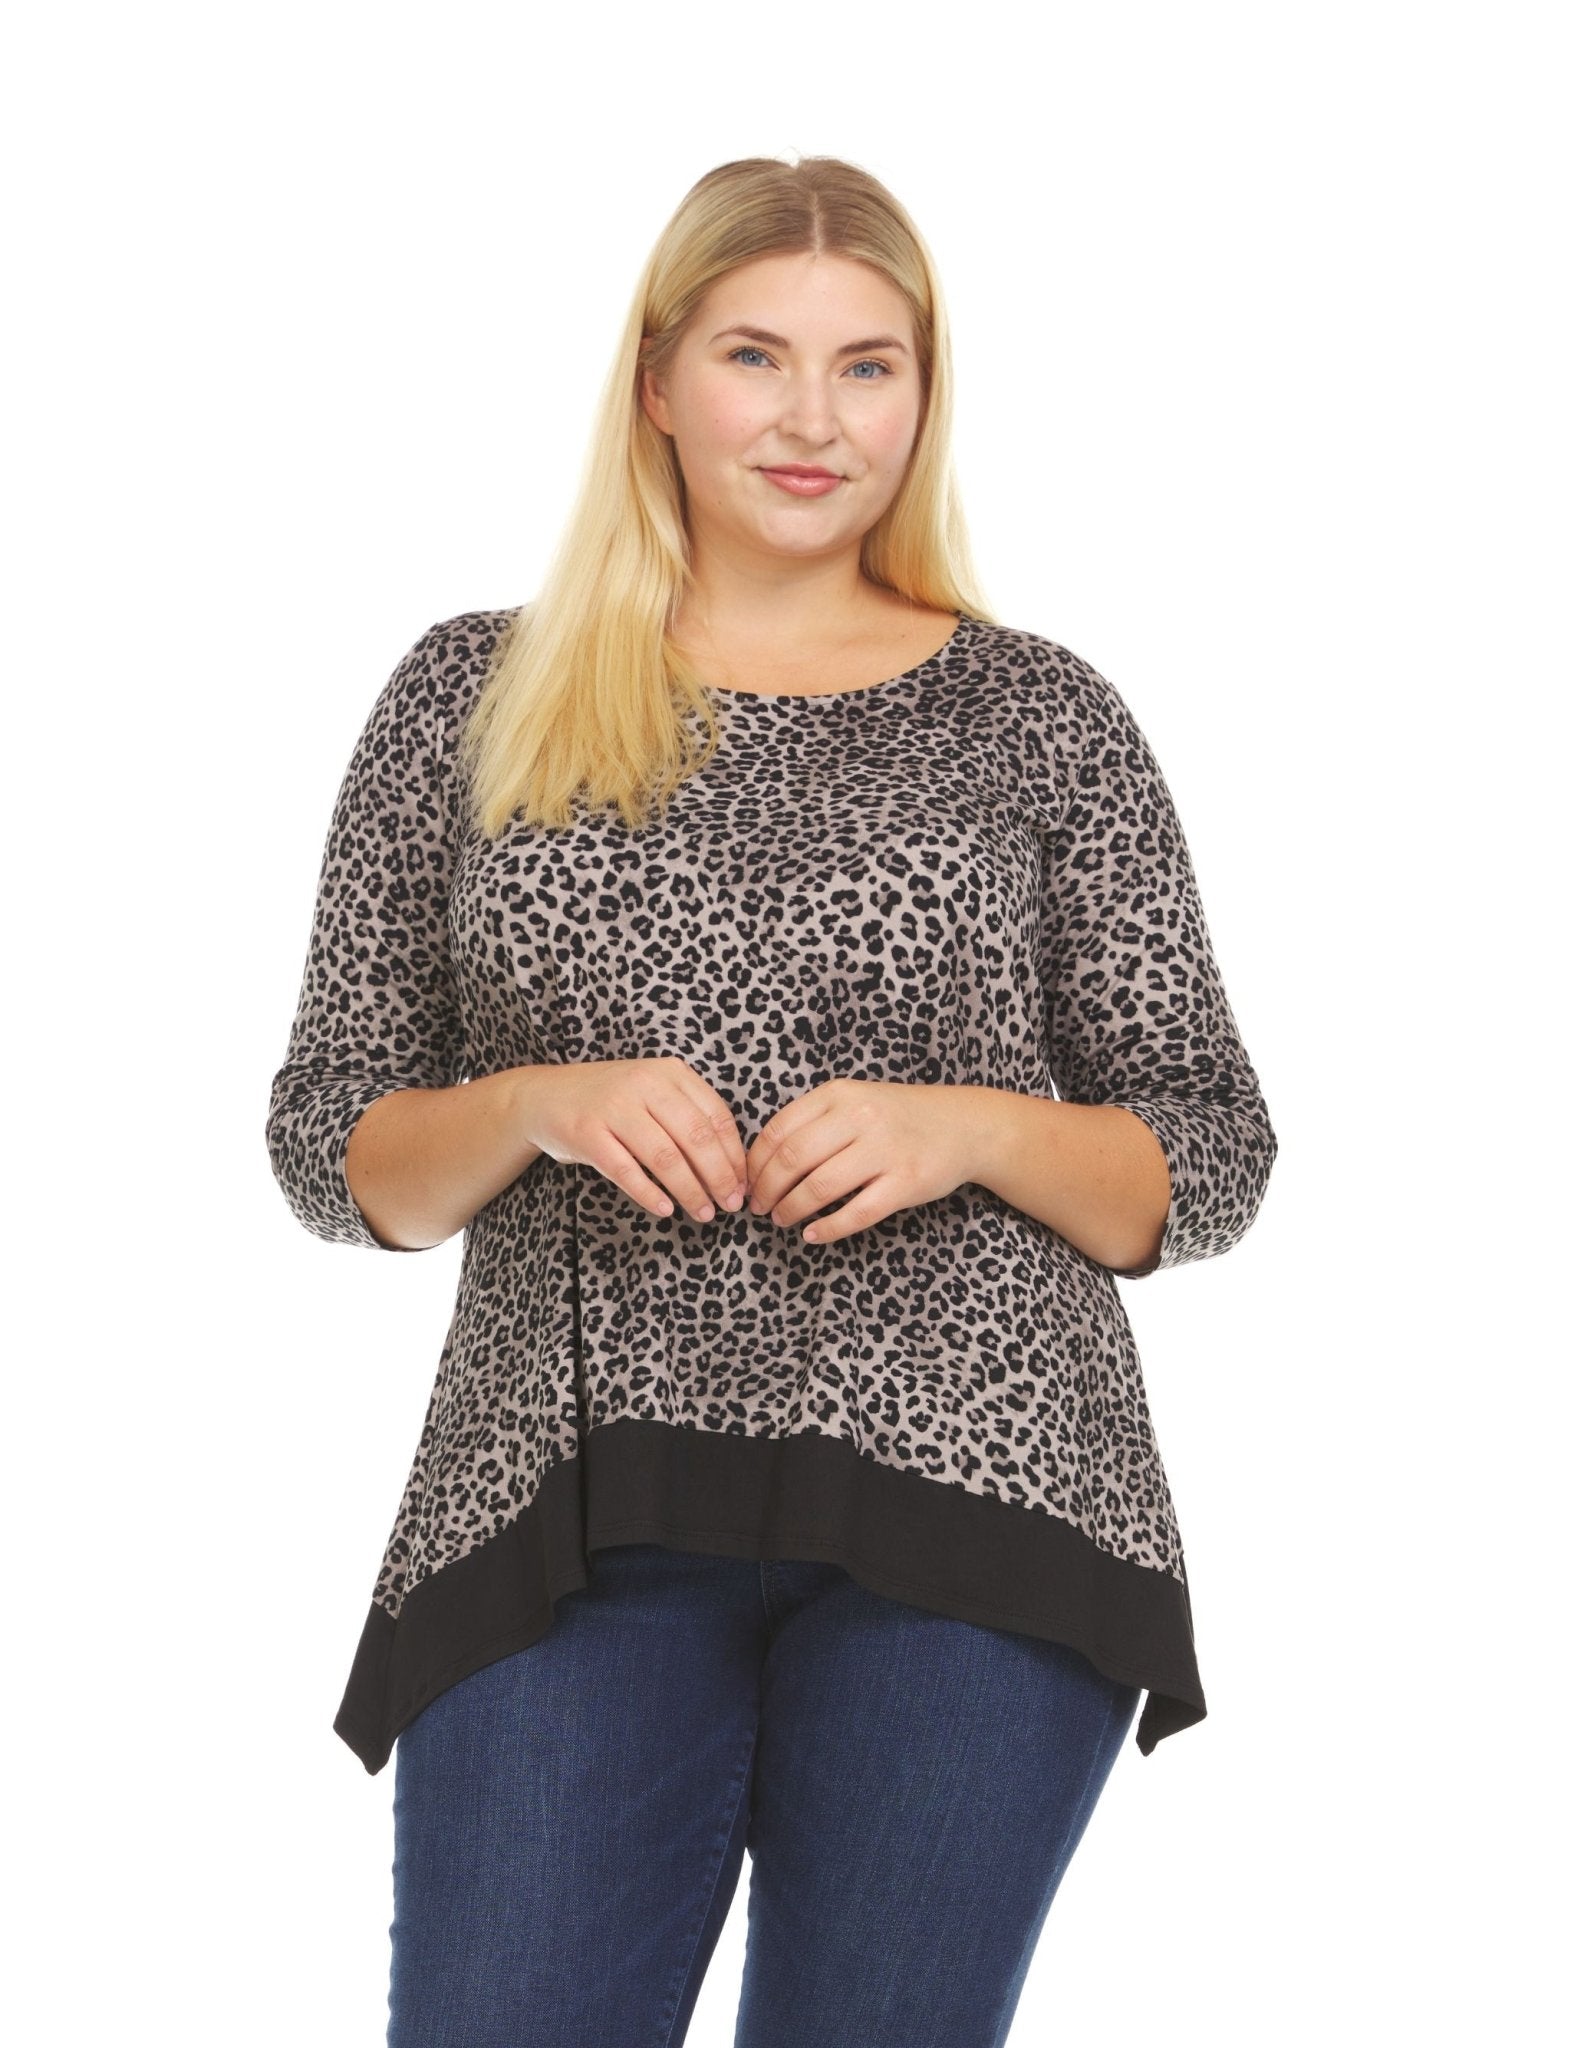 Leopard Print Tunic Top With Solid Color Handkerchief Bottom - Plus - DressbarnShirts & Blouses